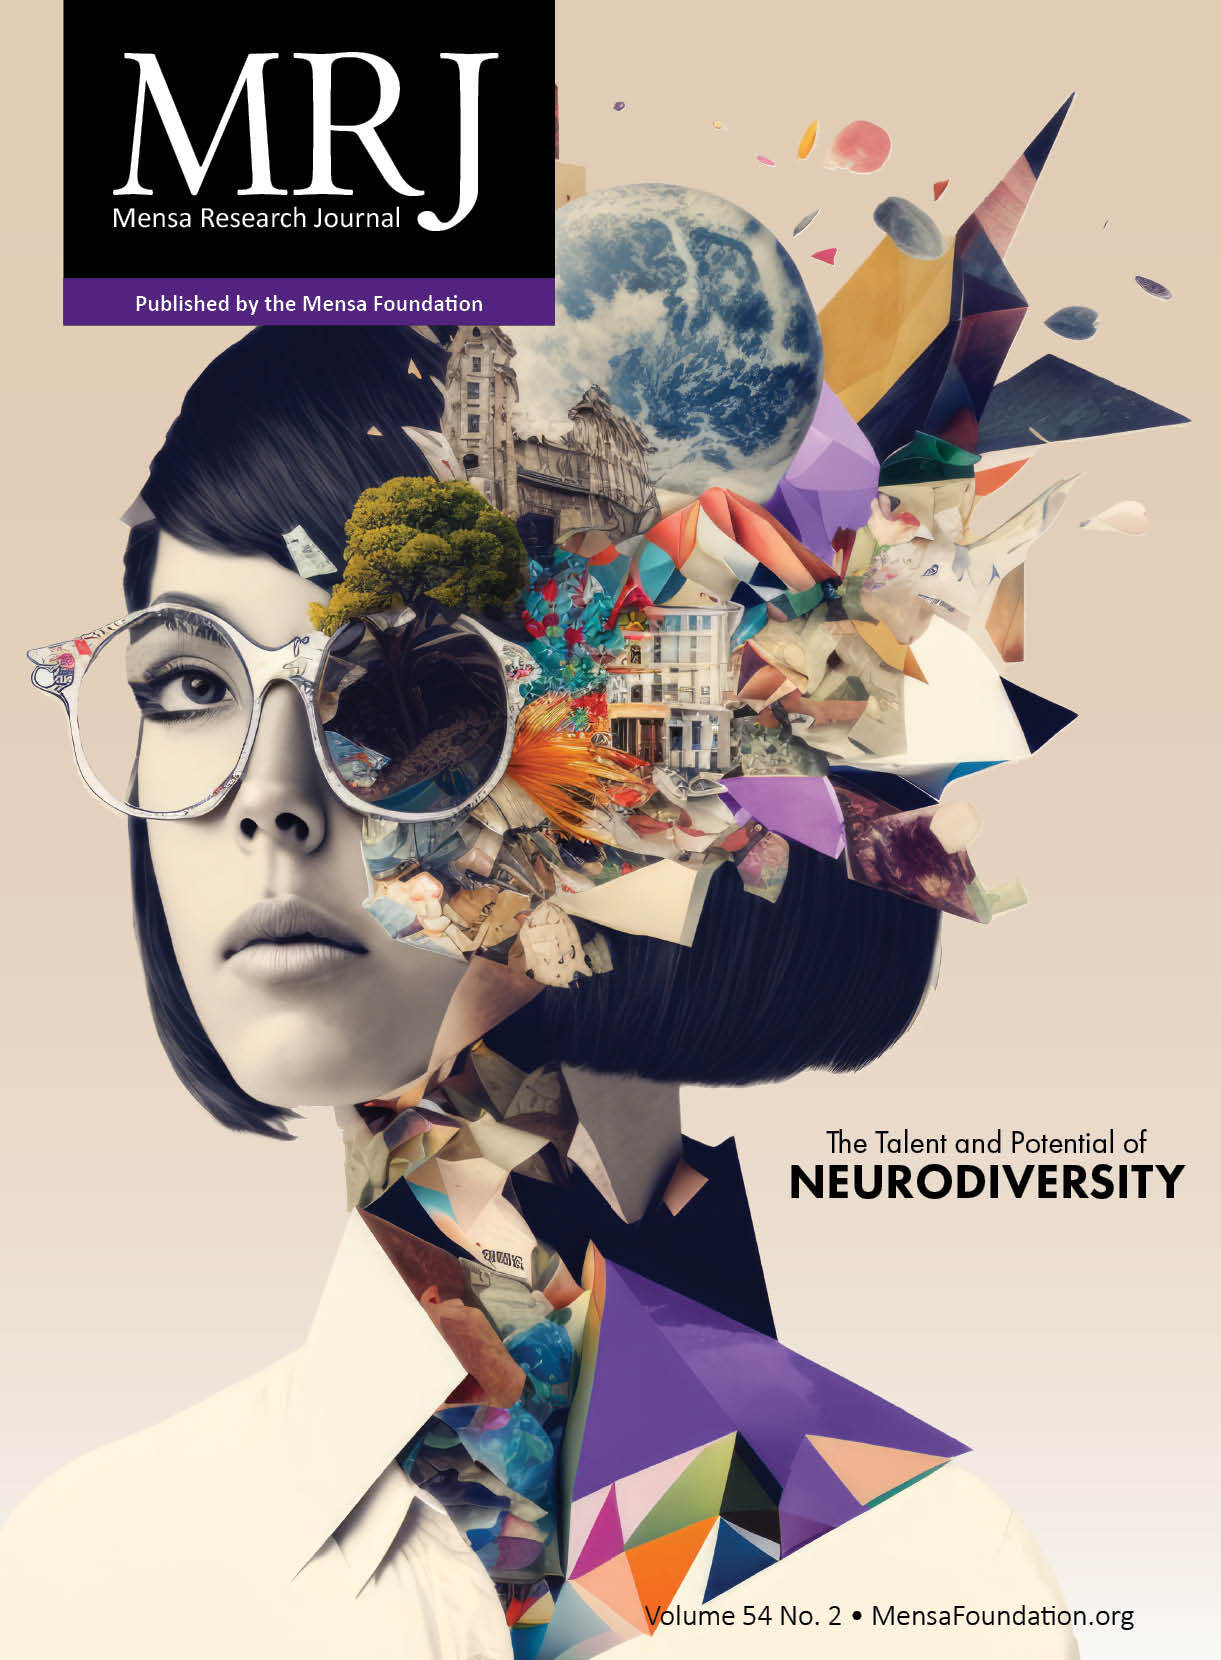 The Talent and Potential of Neurodiversity